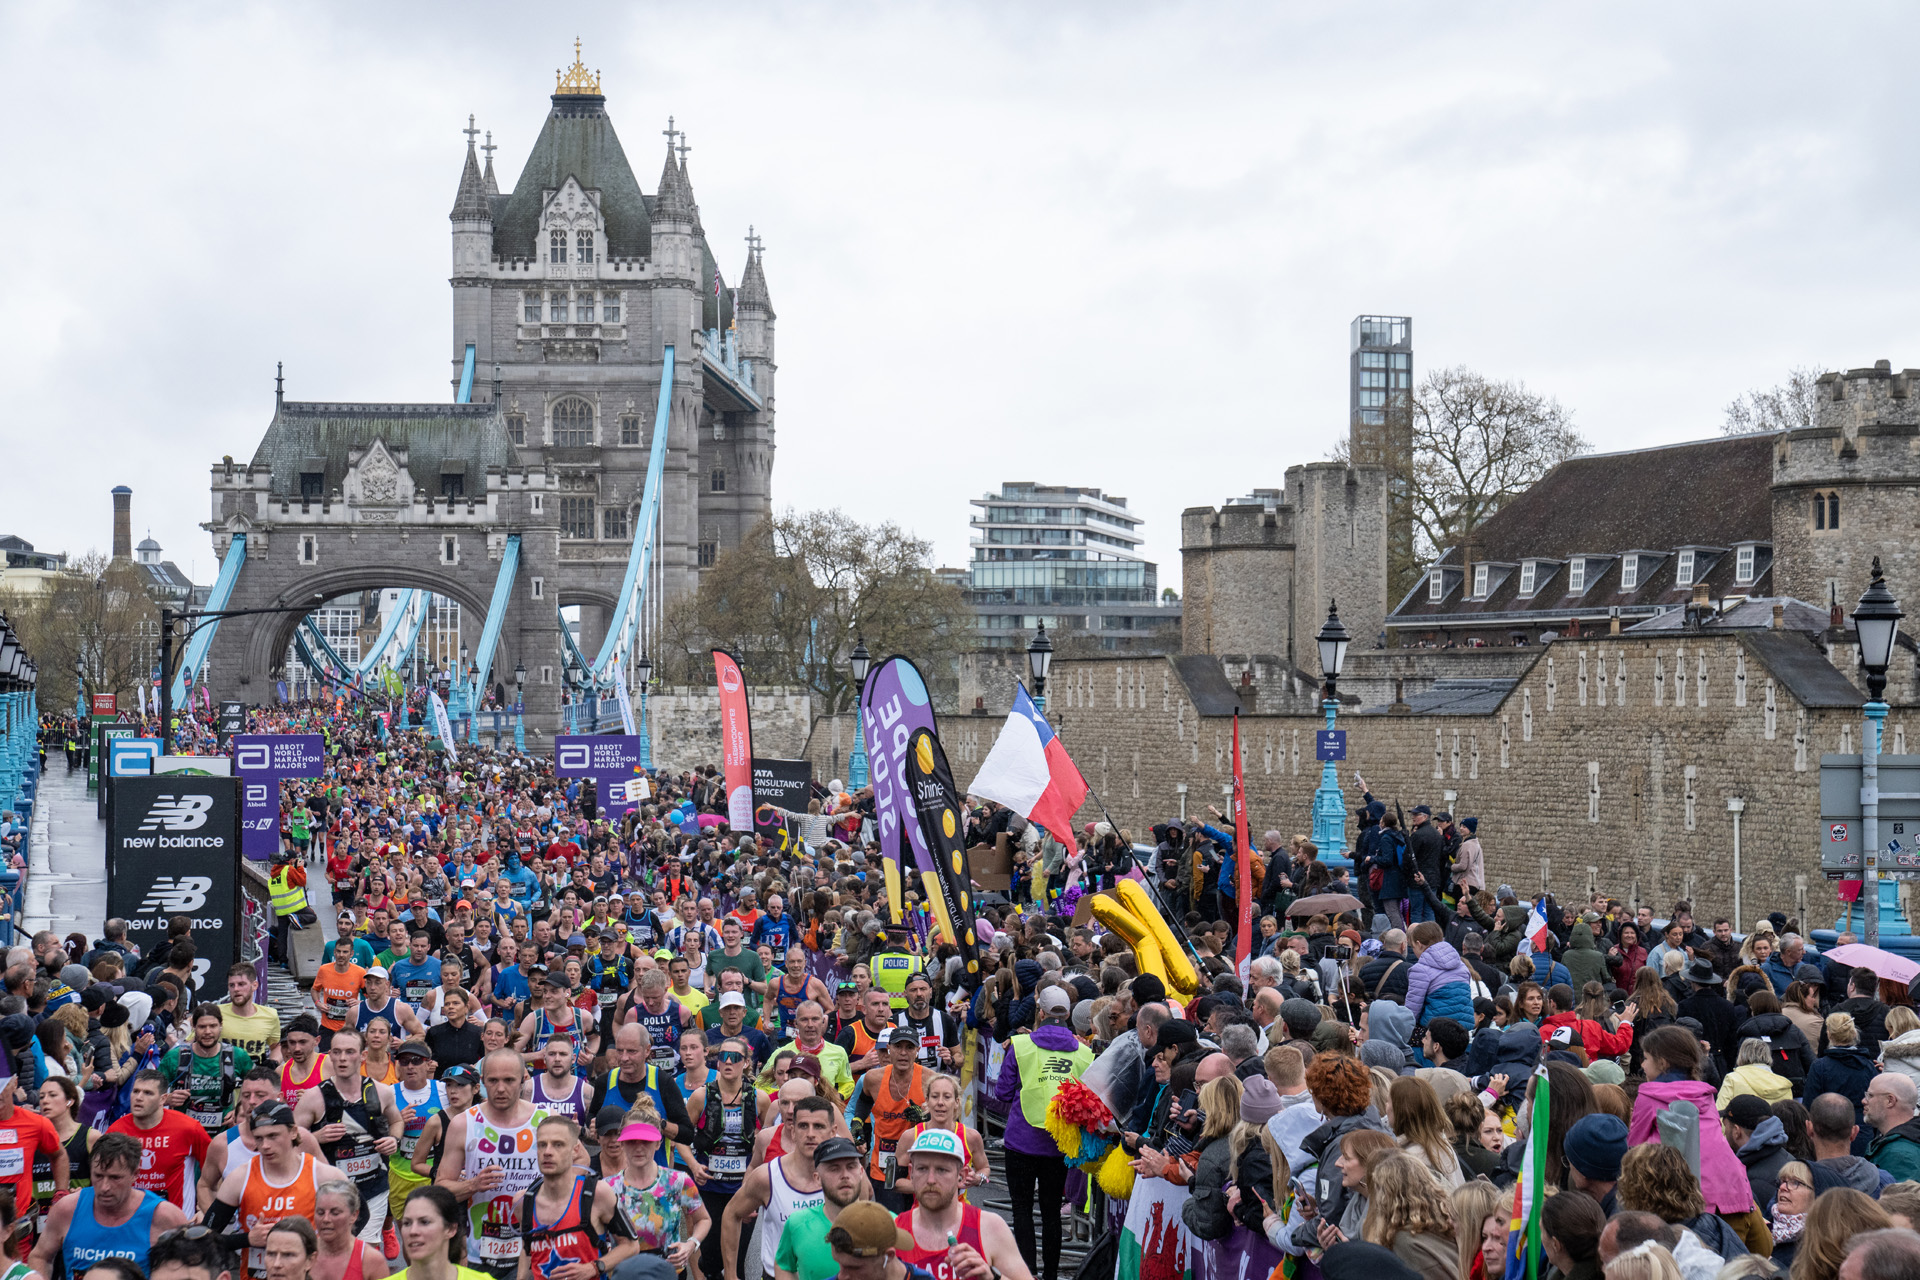 When Is The London Marathon & What Is The Route?